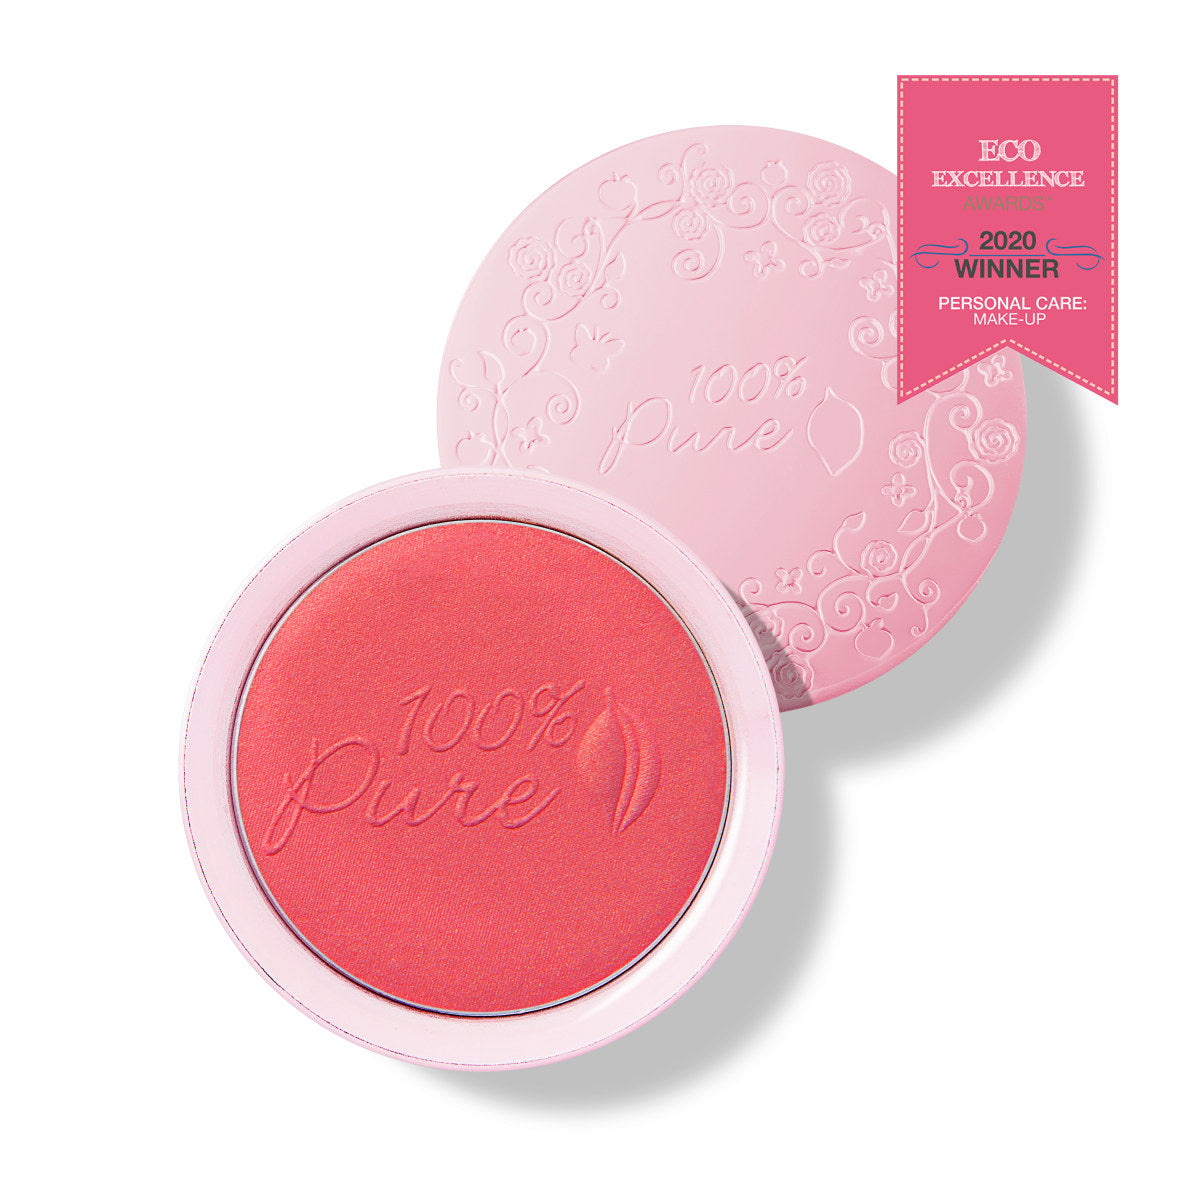 100% PURE® Fruit Pigmented® Blush, Berry